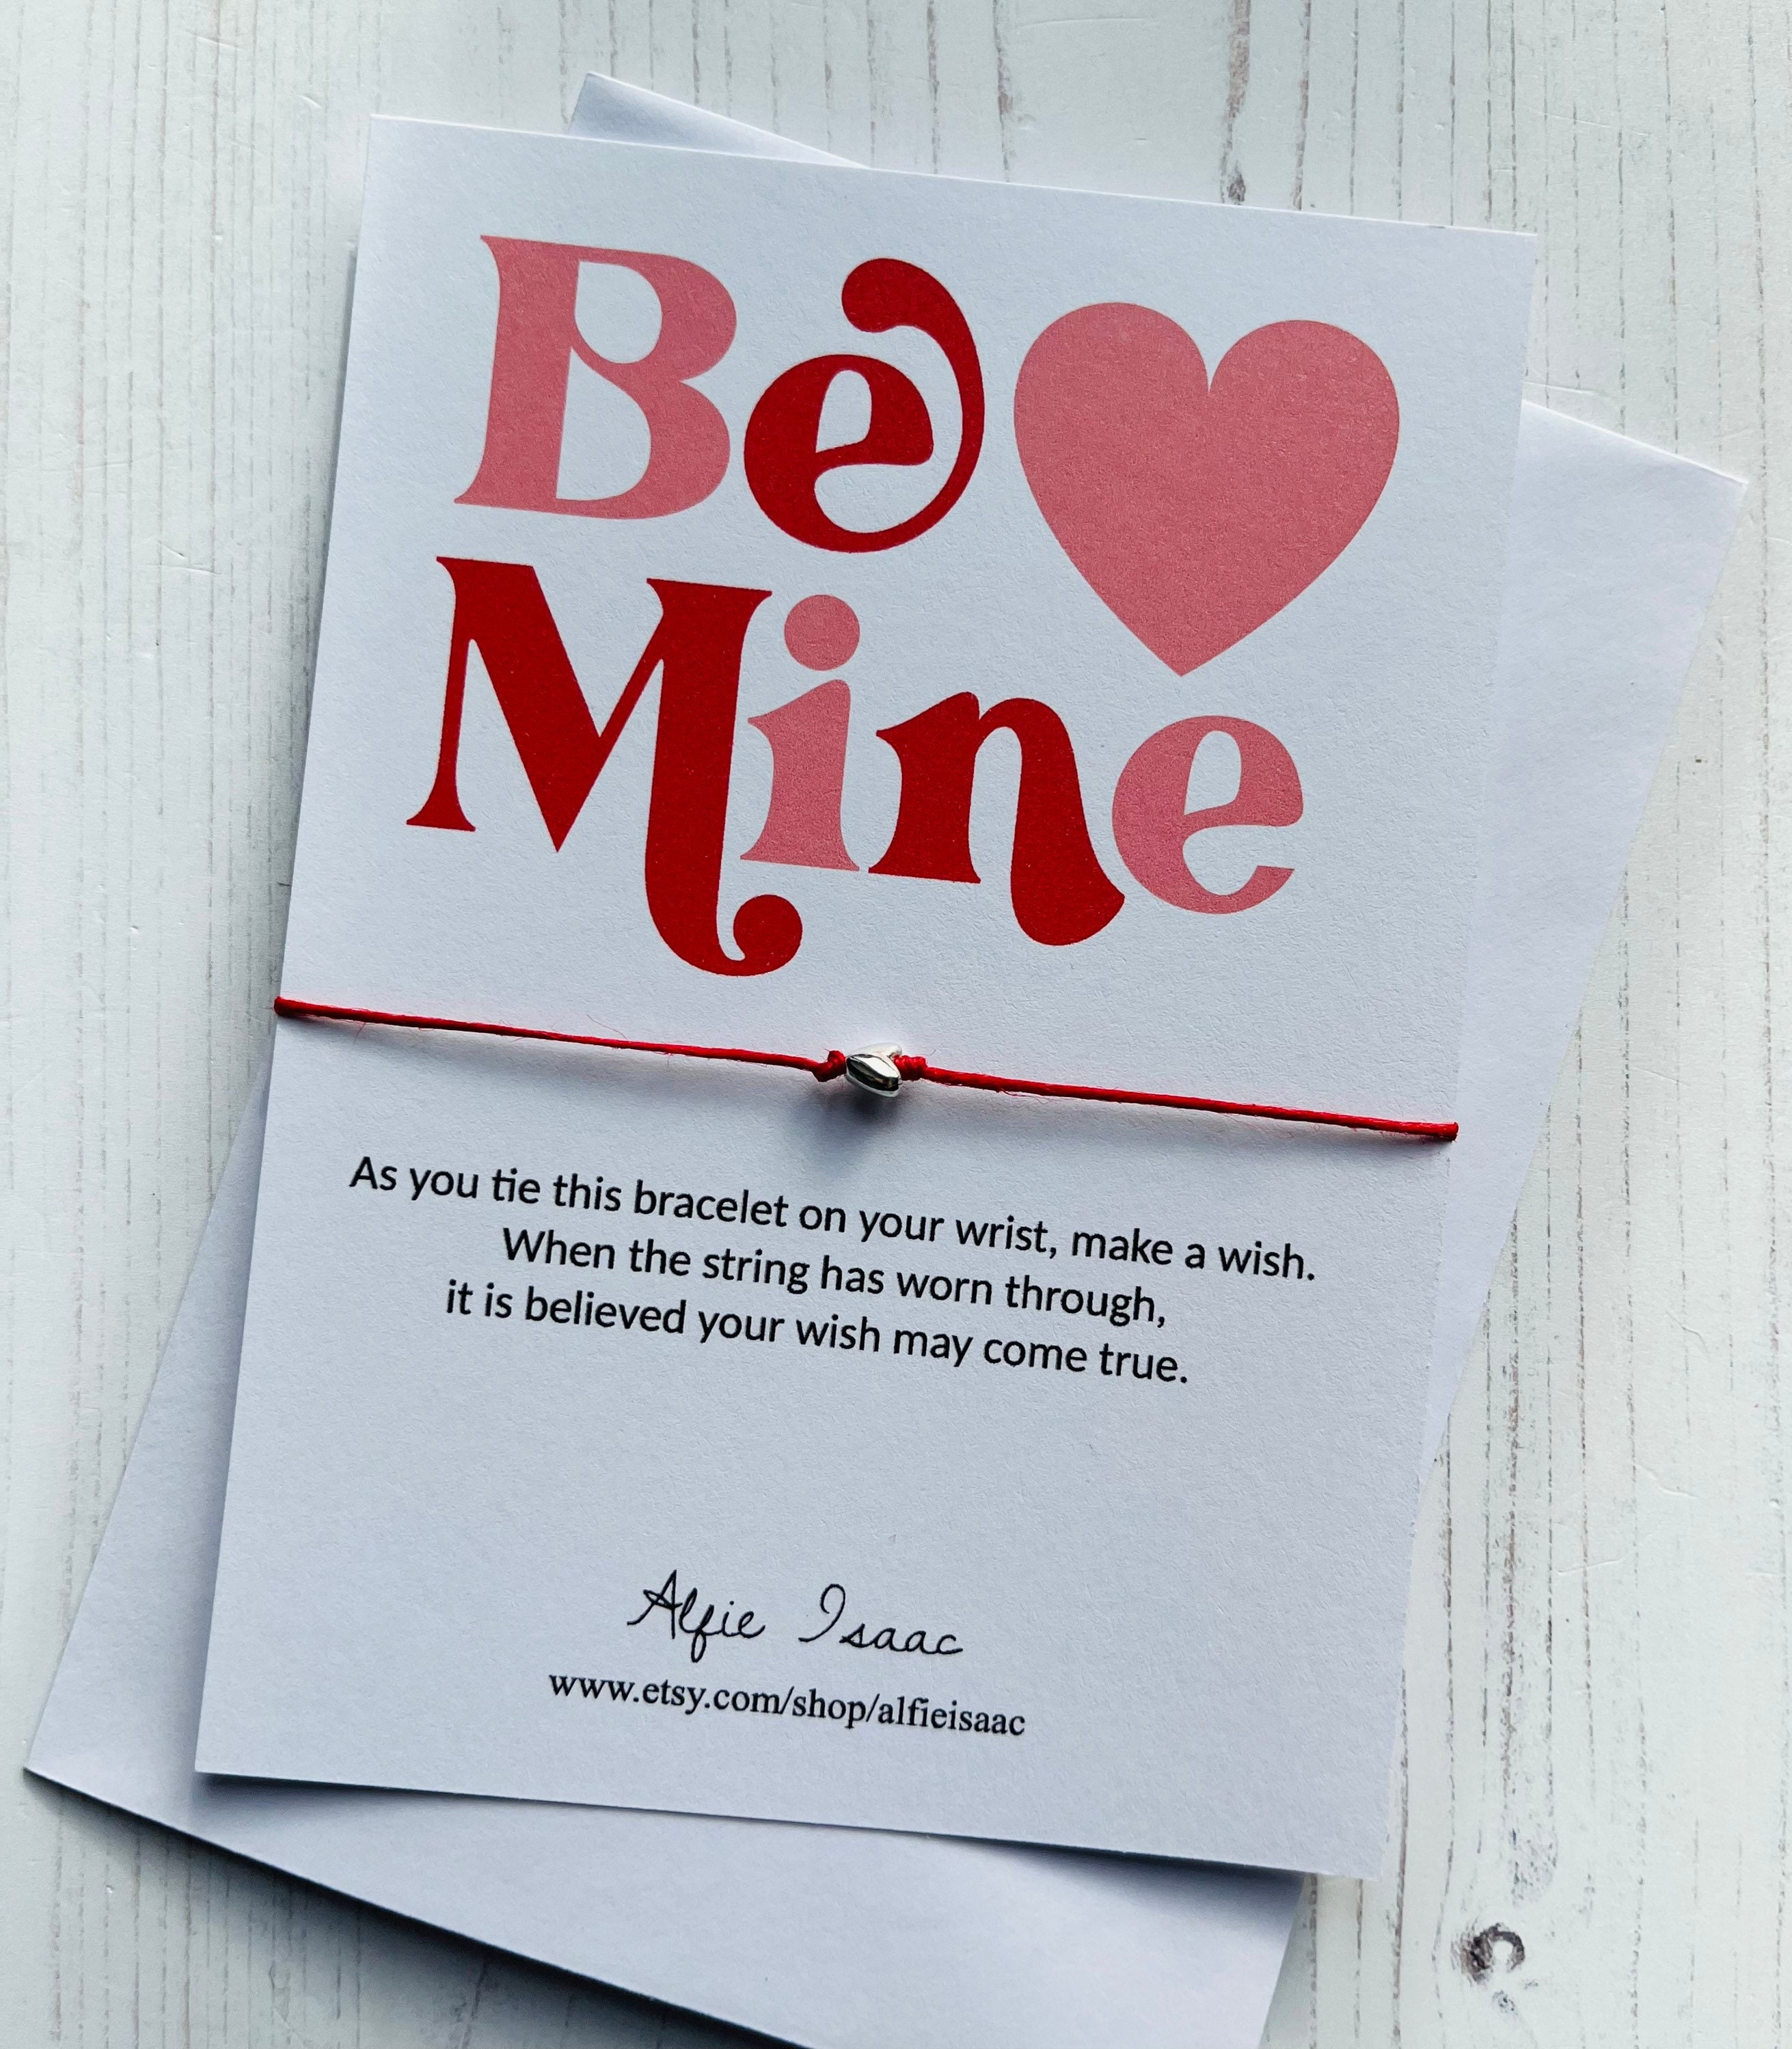 Marry Me Valentine Heart Wish Bracelet on small card & envelope I Love You 